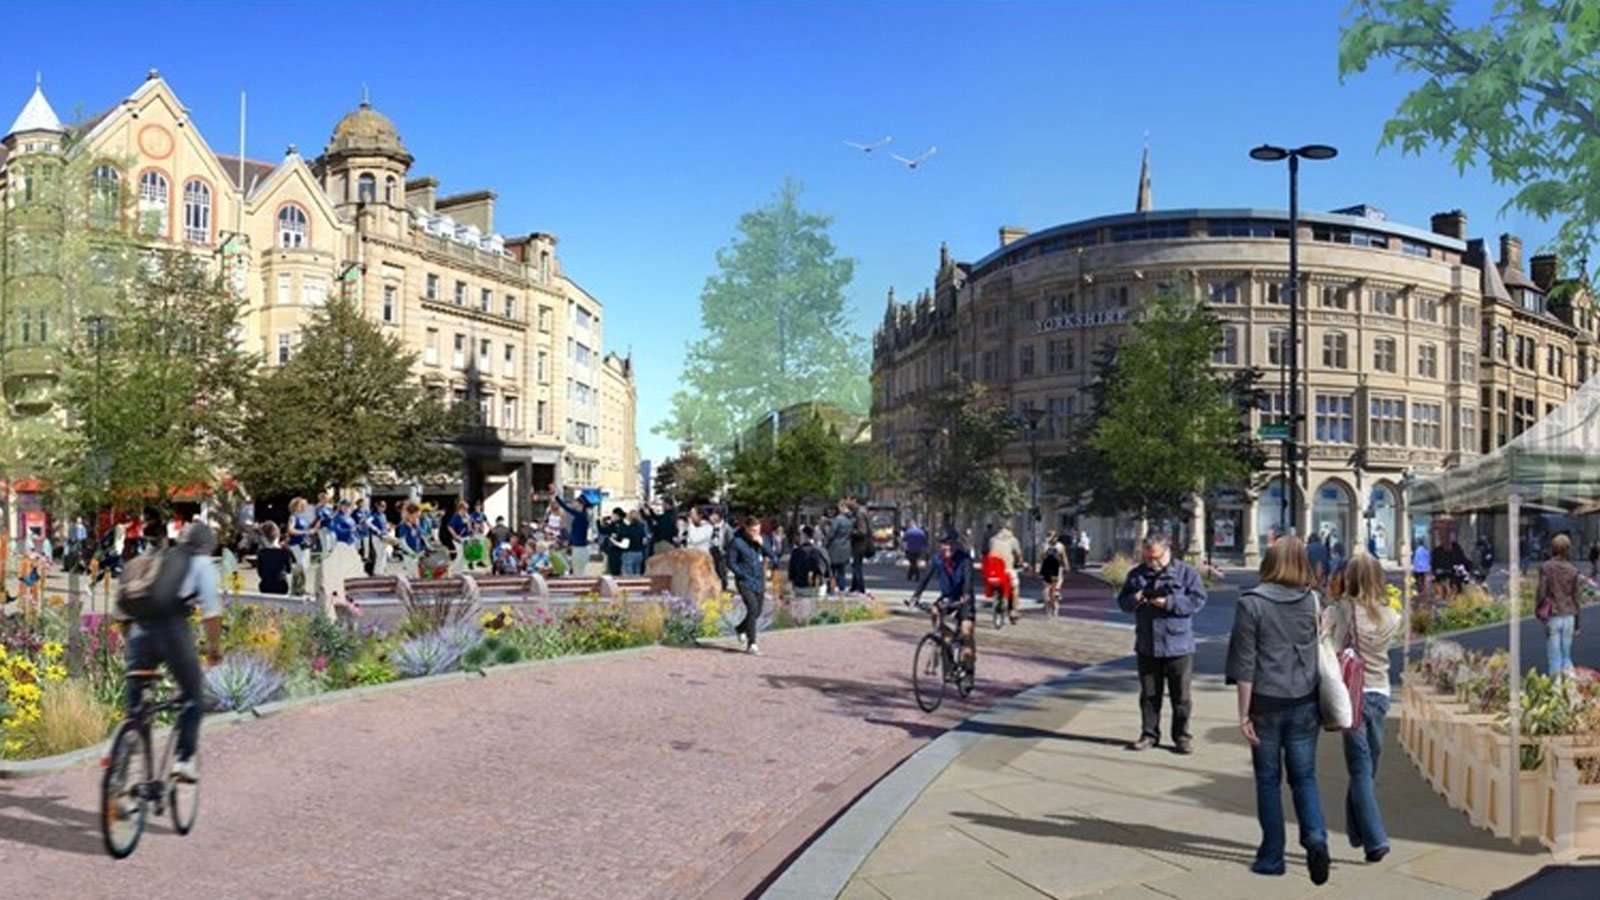 Plans for High Street and Fargate's 'Future High Streets' development